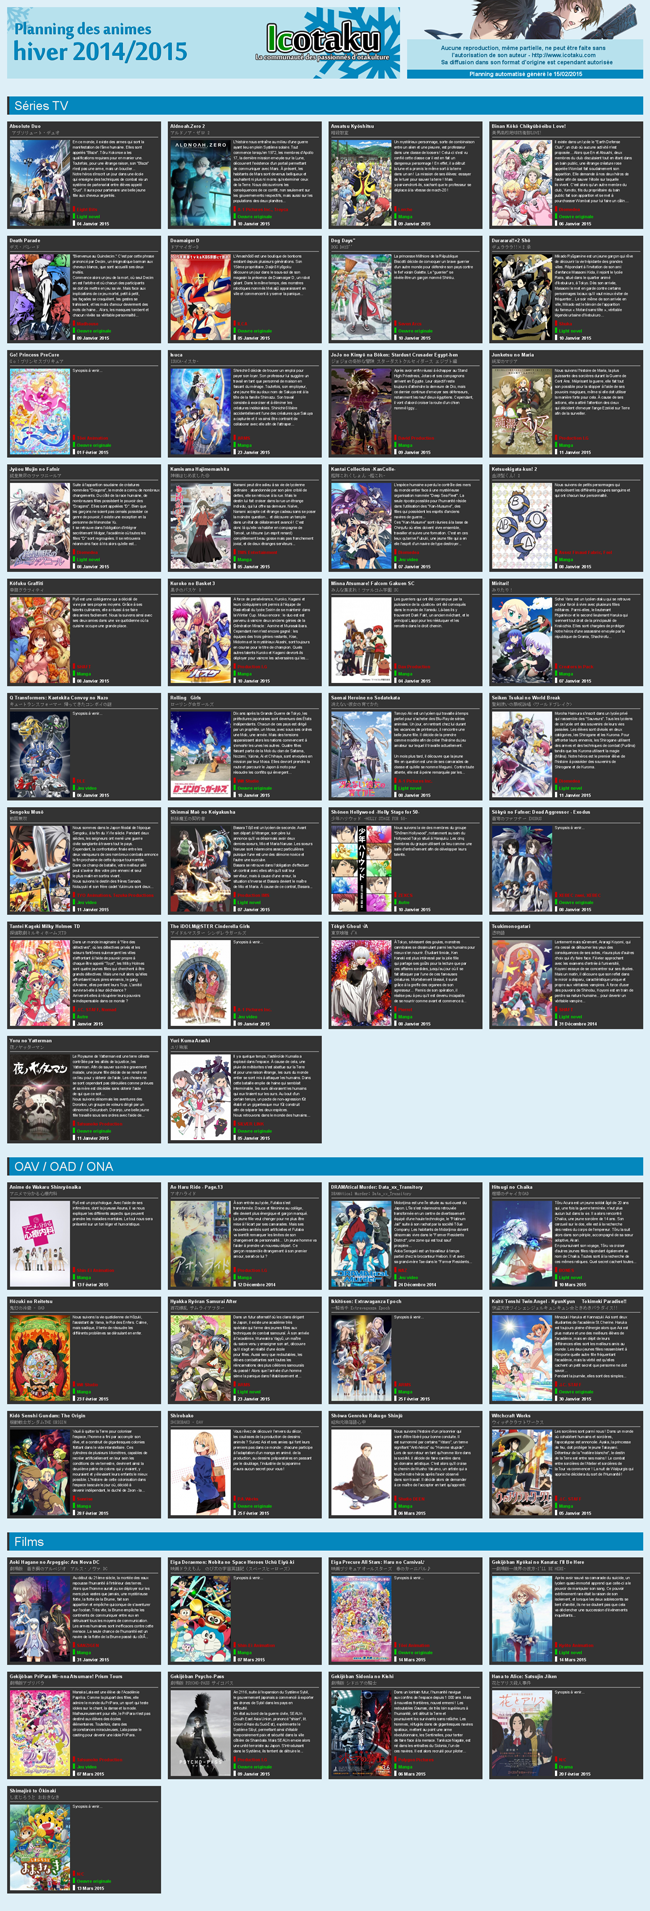 http://forum.icotaku.com/images/forum/plannings/hiver2015/planning_anime_hiver_2014_2015_mini.png